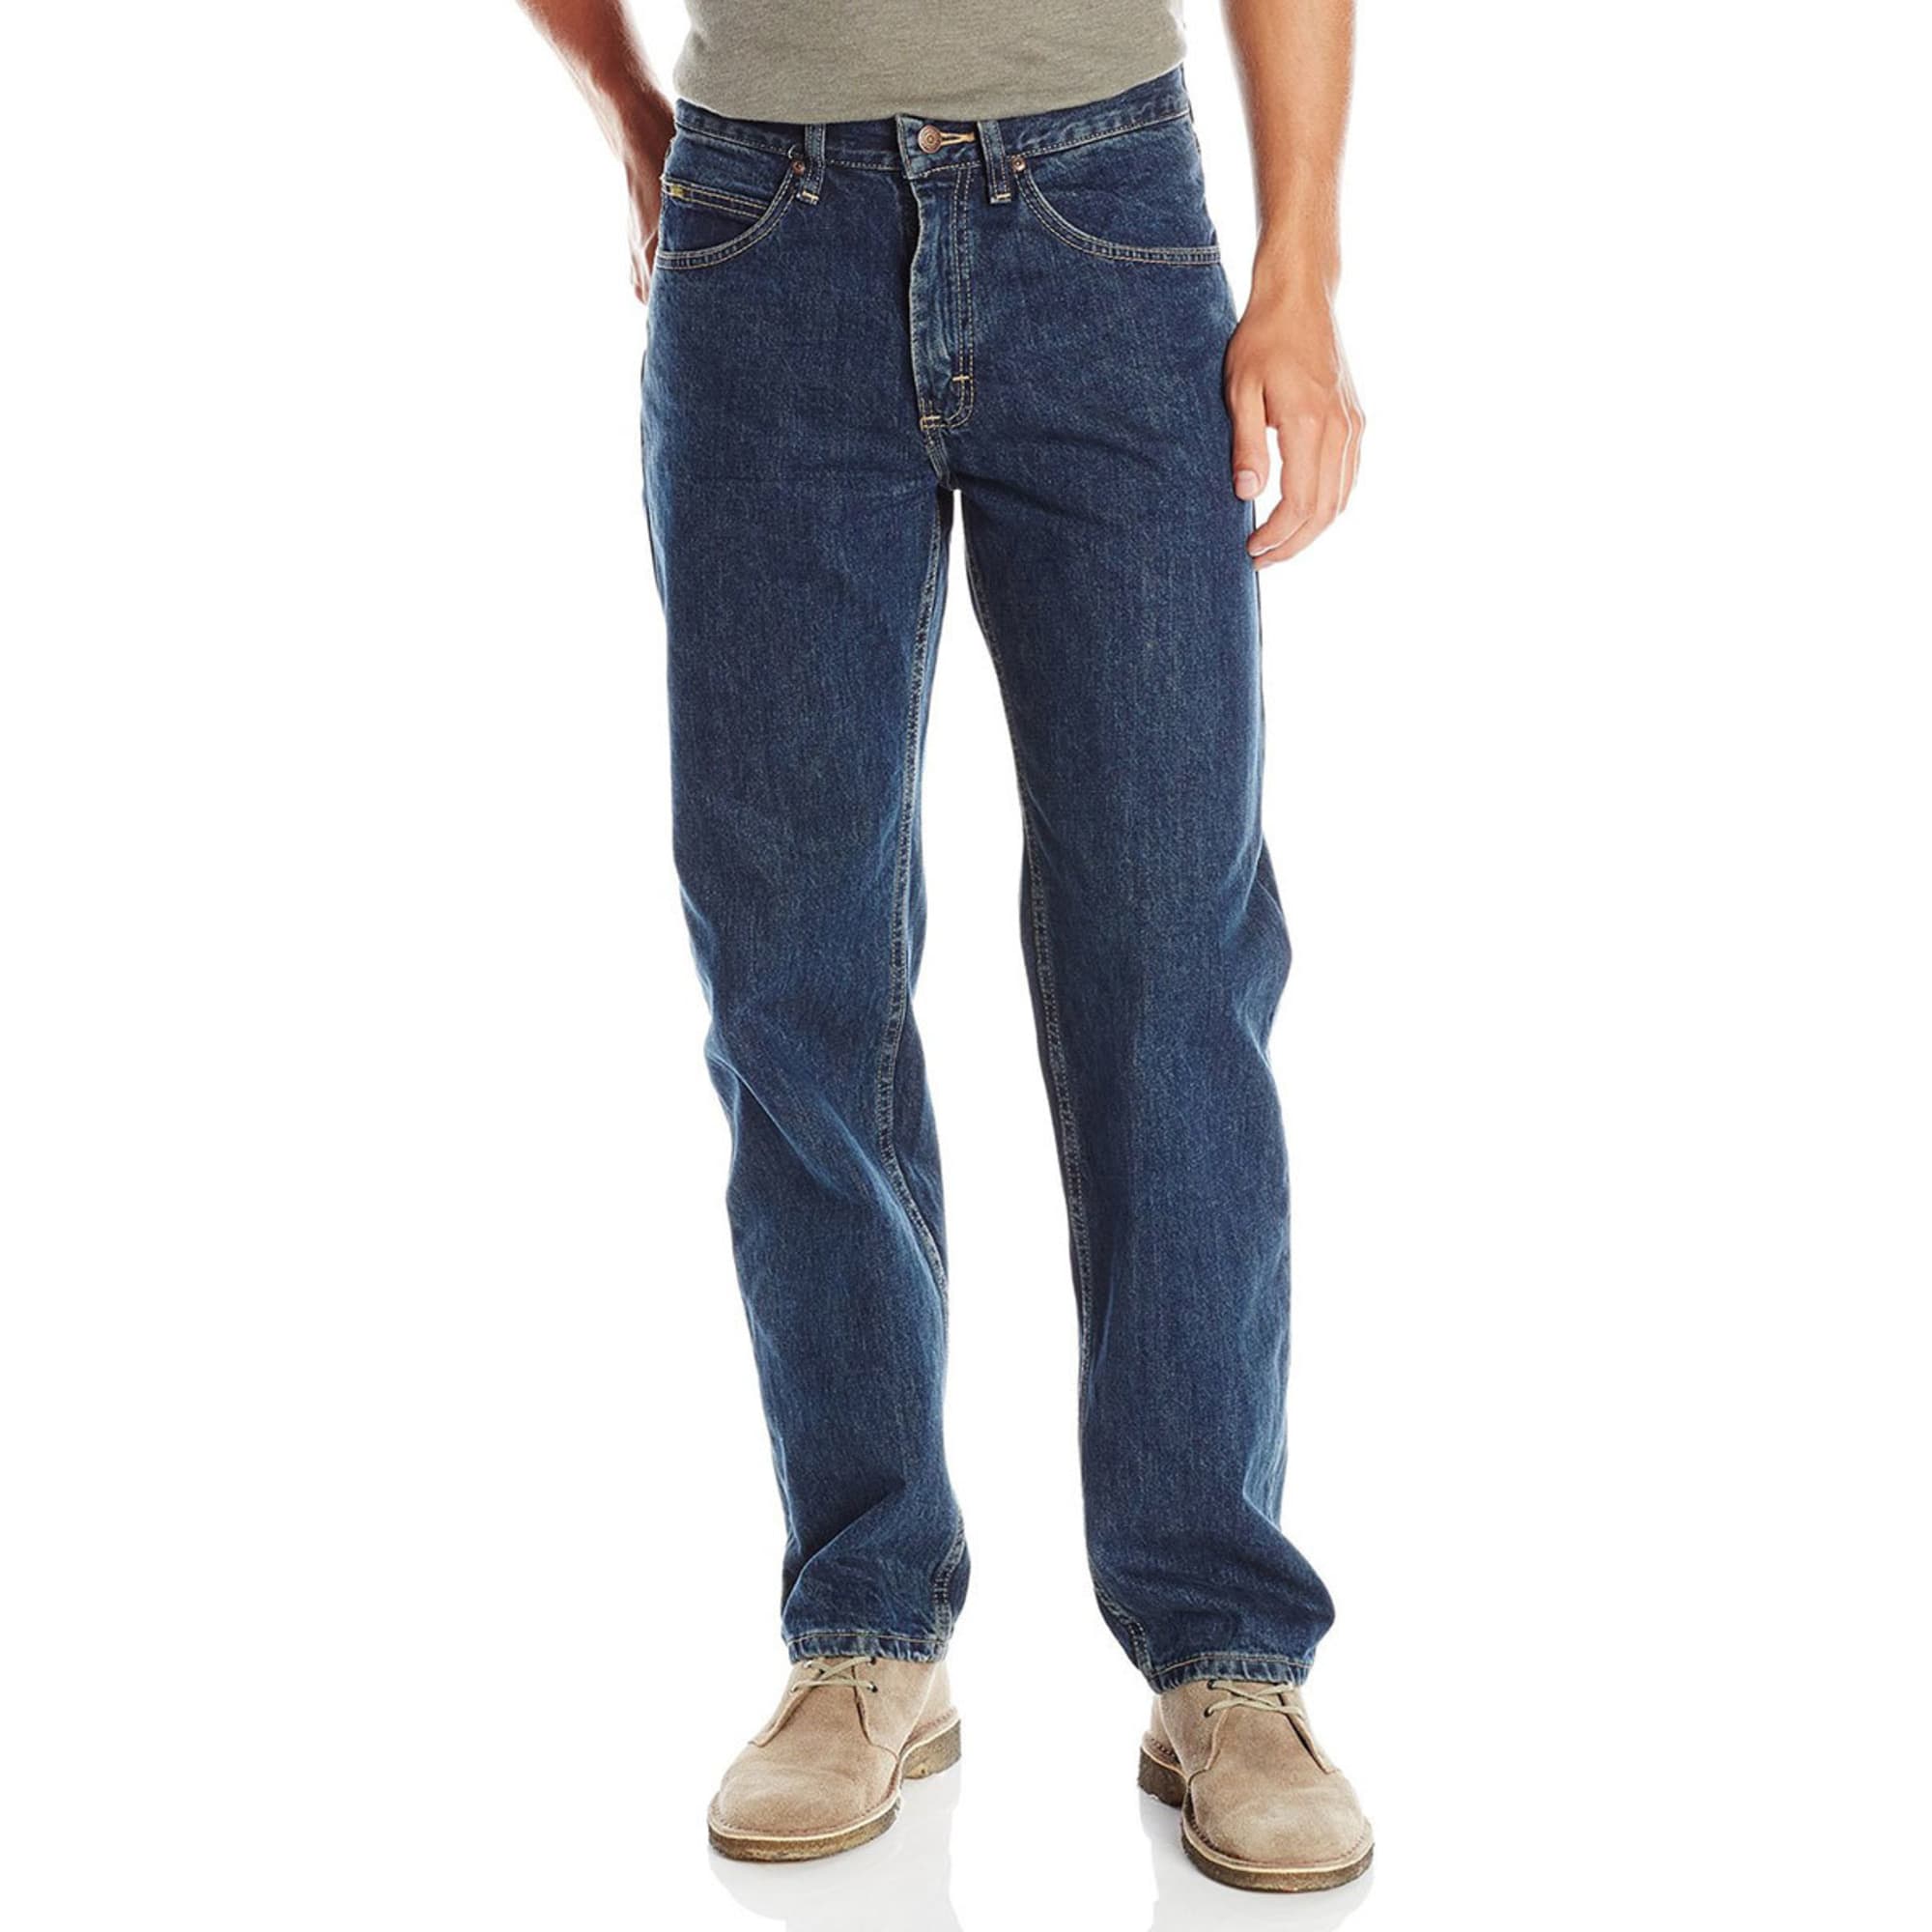 LEE Men's Relaxed Fit Tapered Leg Jeans - Bob's Stores